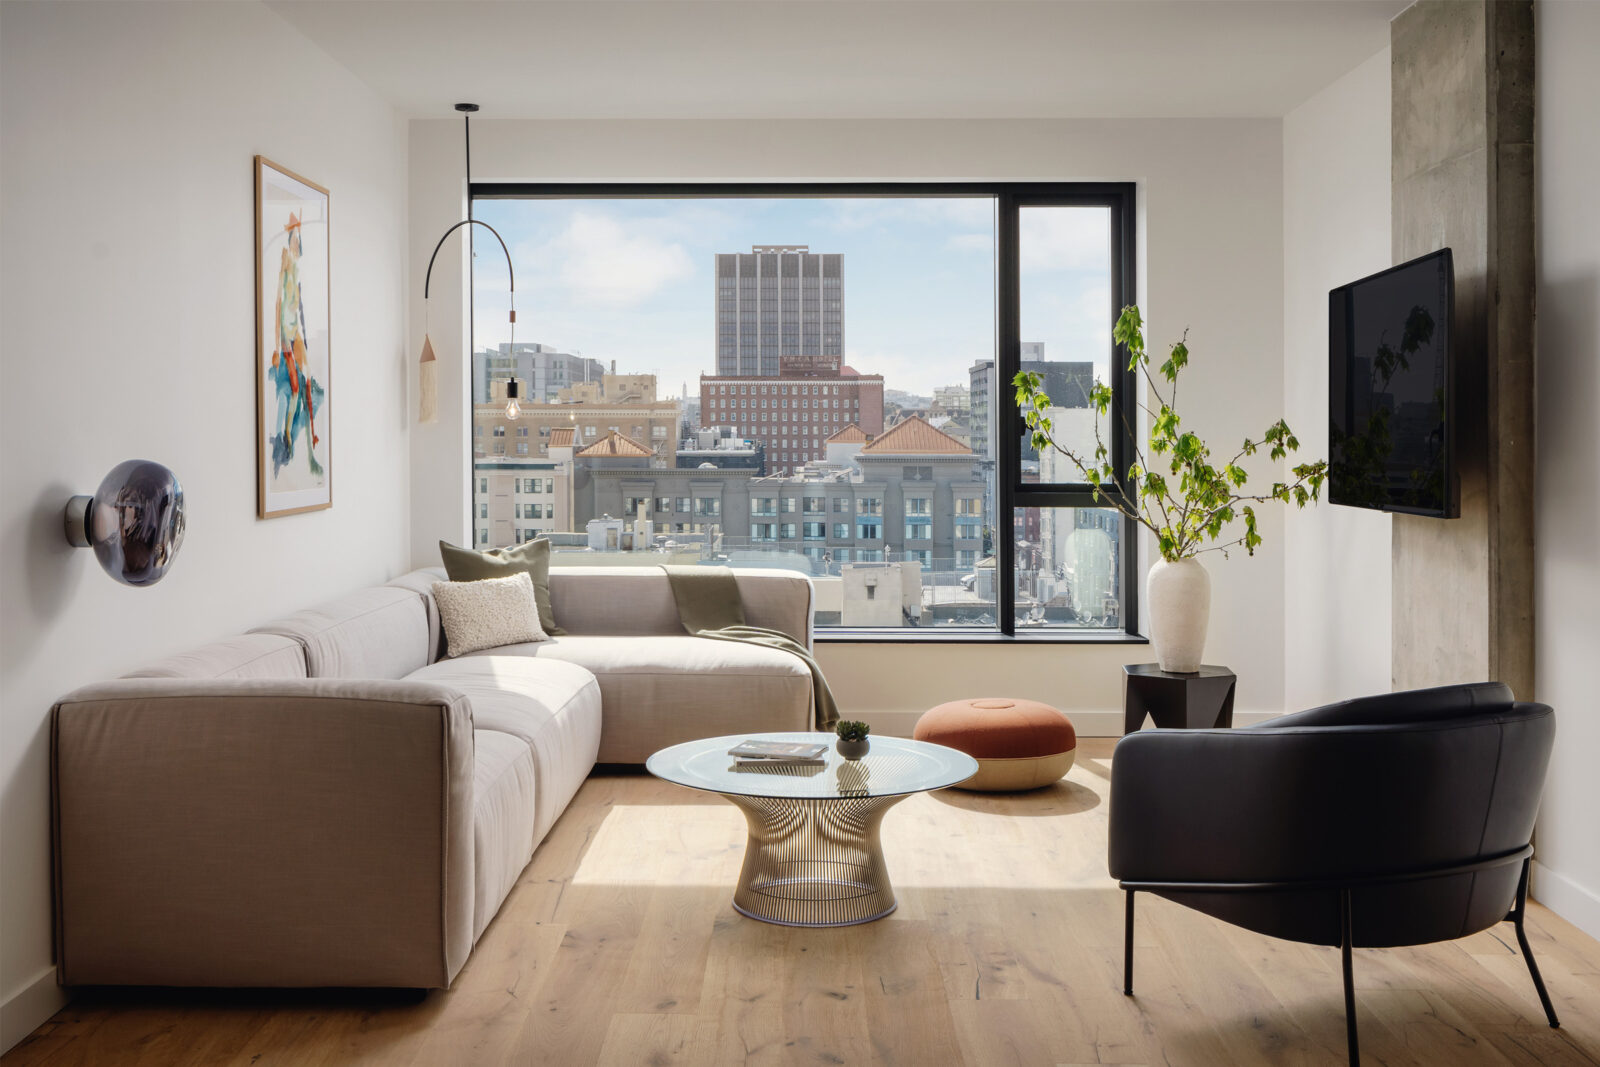 A L-shaped couch positioned near the glass window offers a wonderful view of the city.